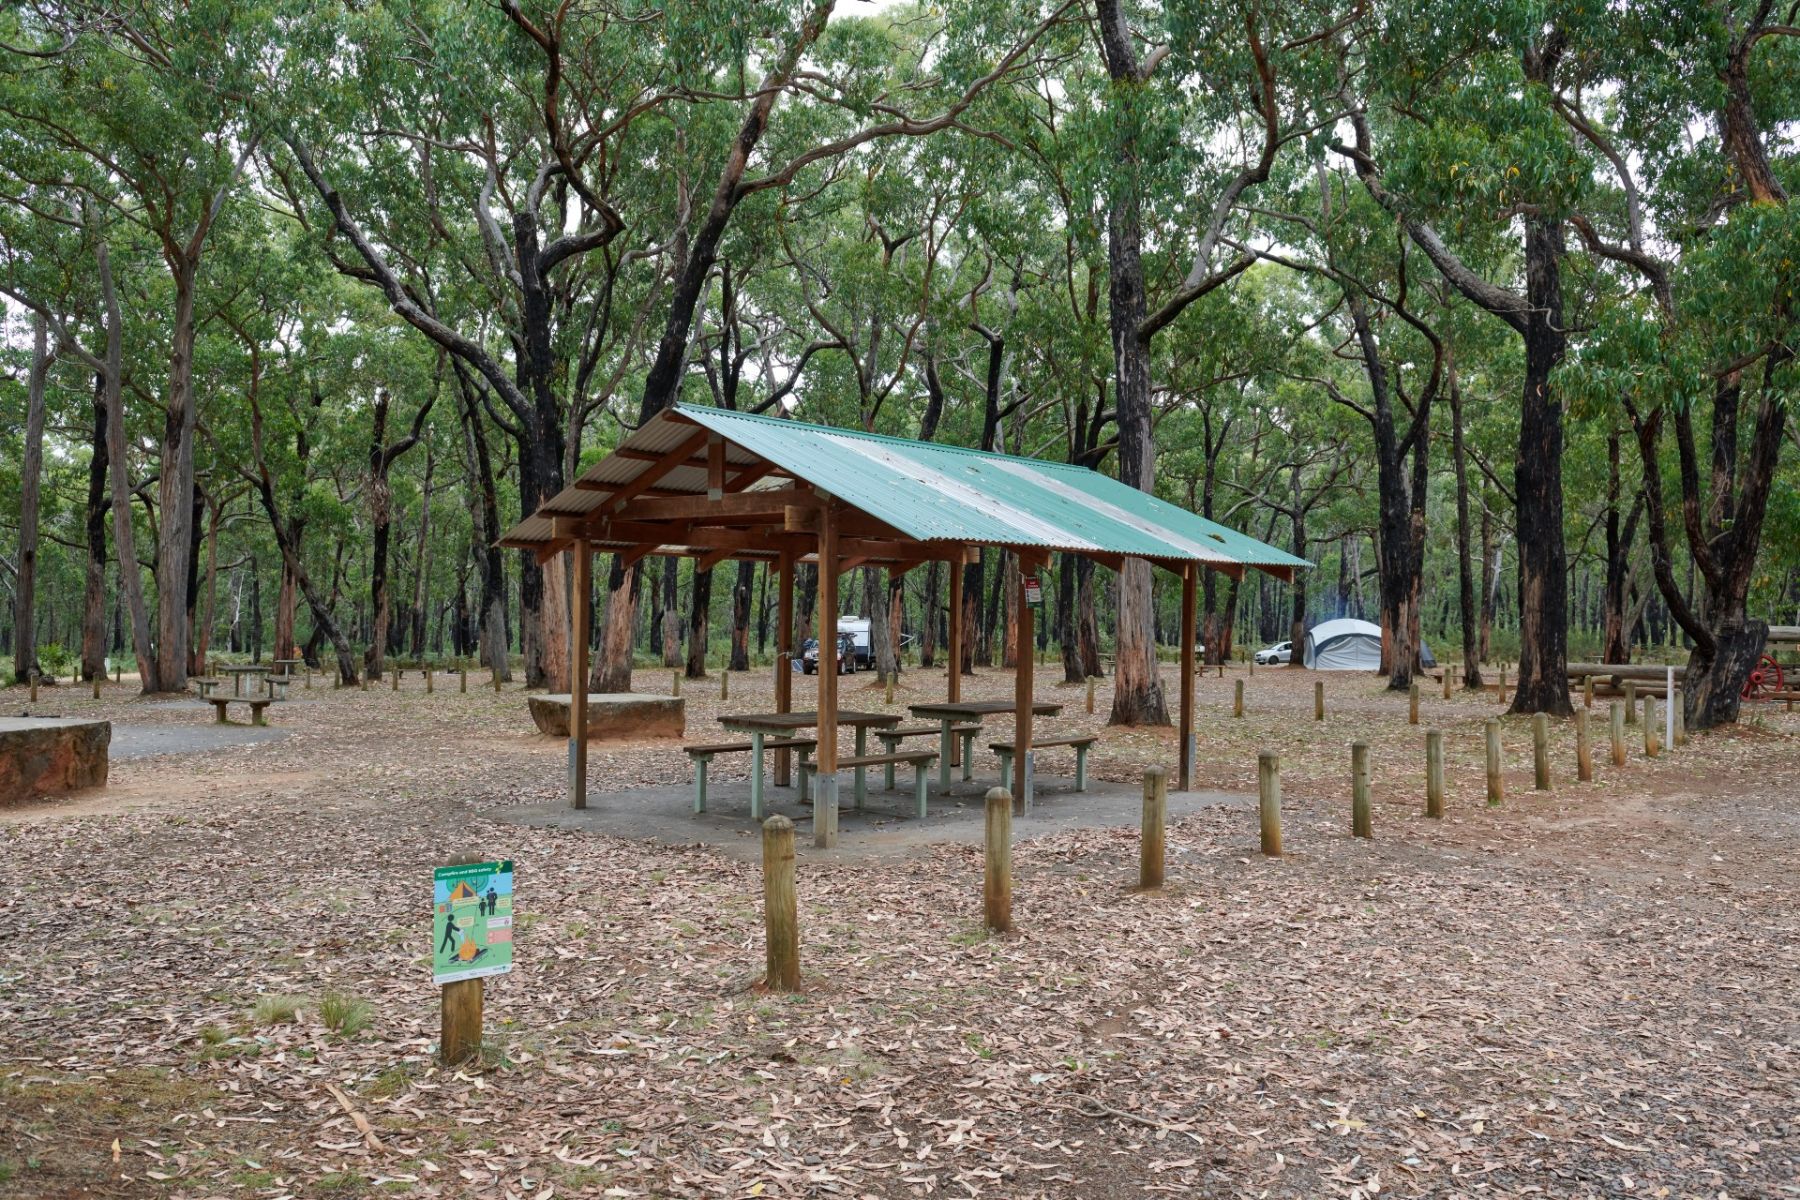 A picnic shelter with two picnic tables